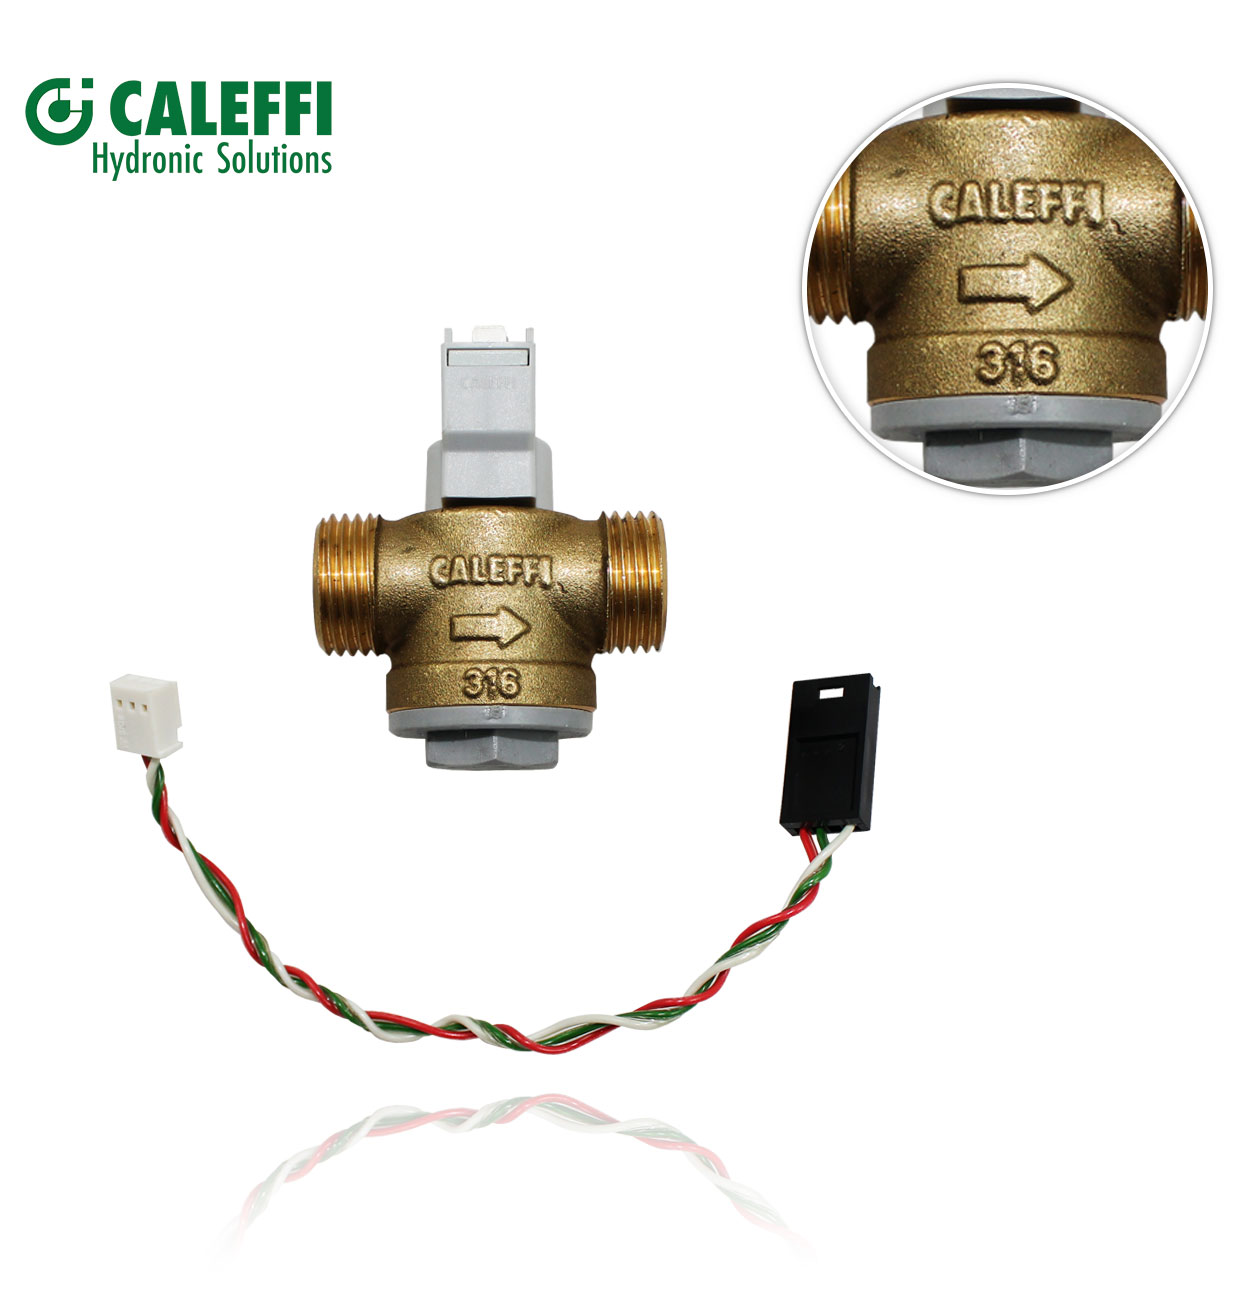 FERROLI 39804220 *CALEFFI 316400* 1/2" 10bar ROTATING FLOW SWITCH with CABLE.